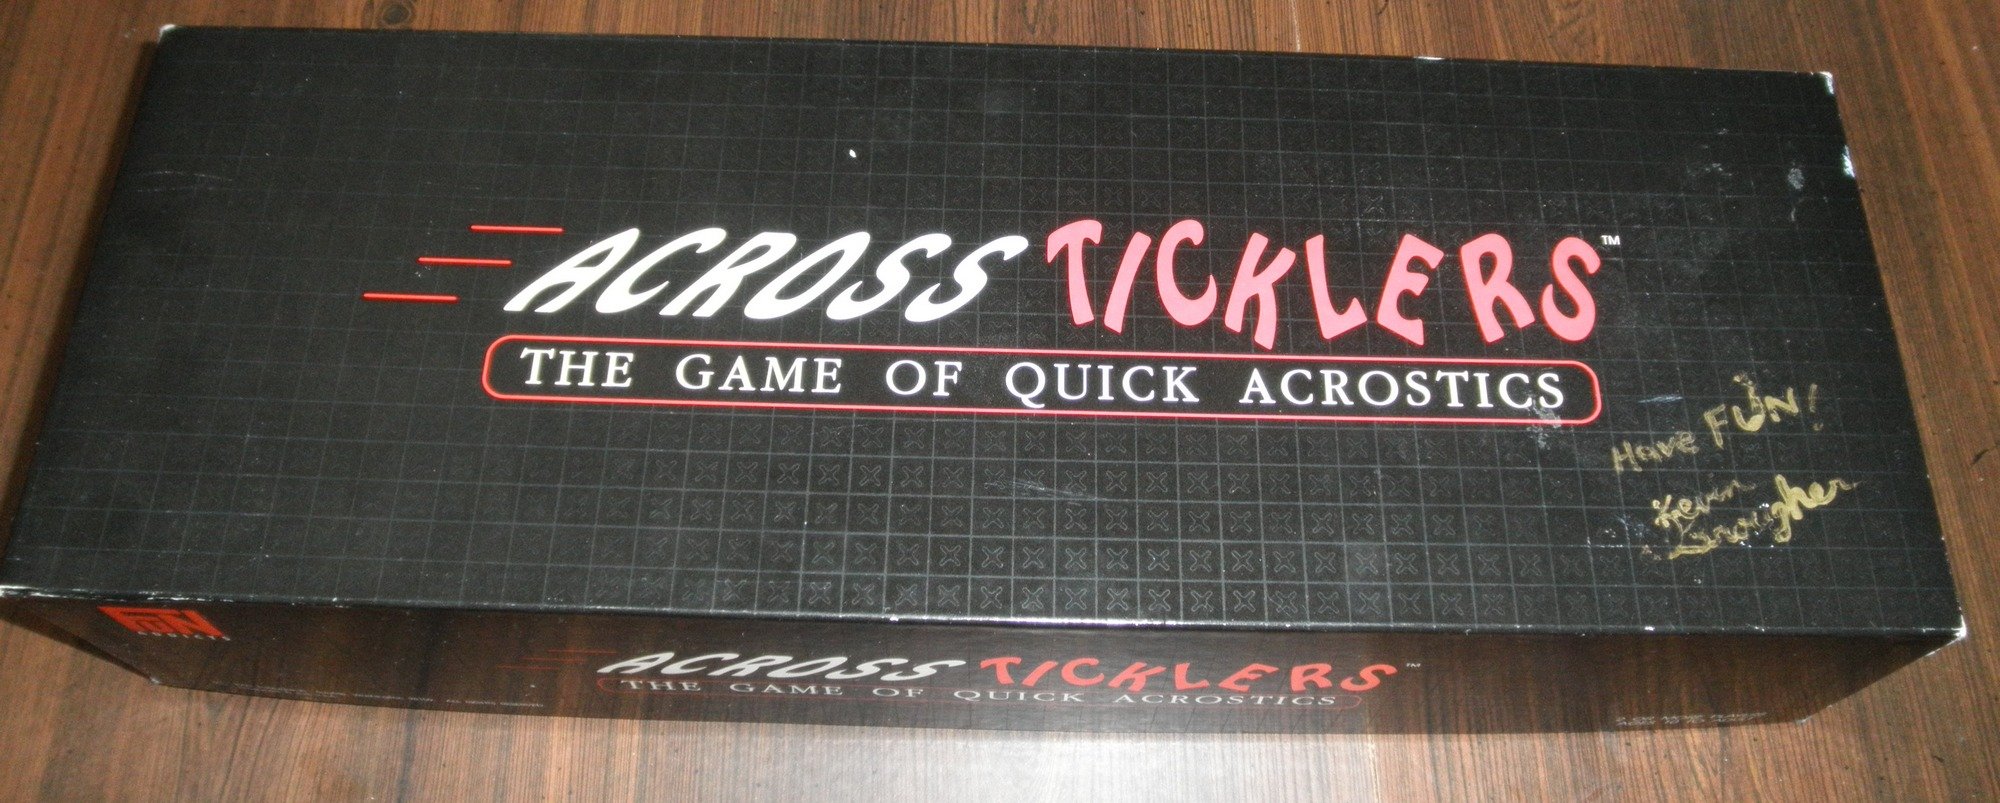 Across Ticklers The Quick Game of Acrostics Board Game Review